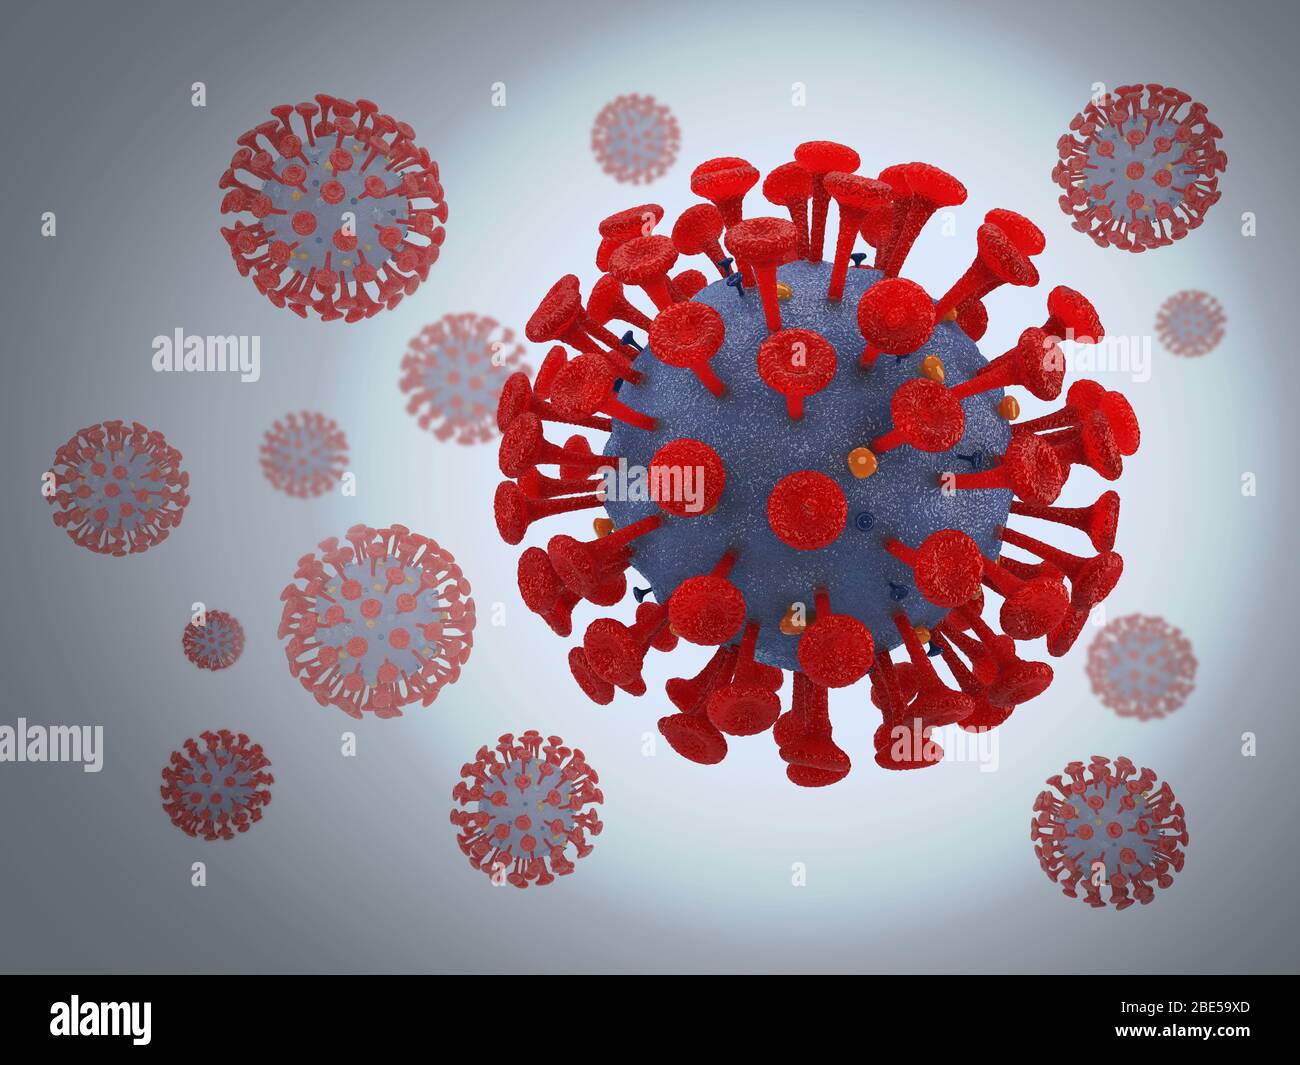 3d illustration of flu Covid-19 cell floating under microscope with clipping path Stock Photo